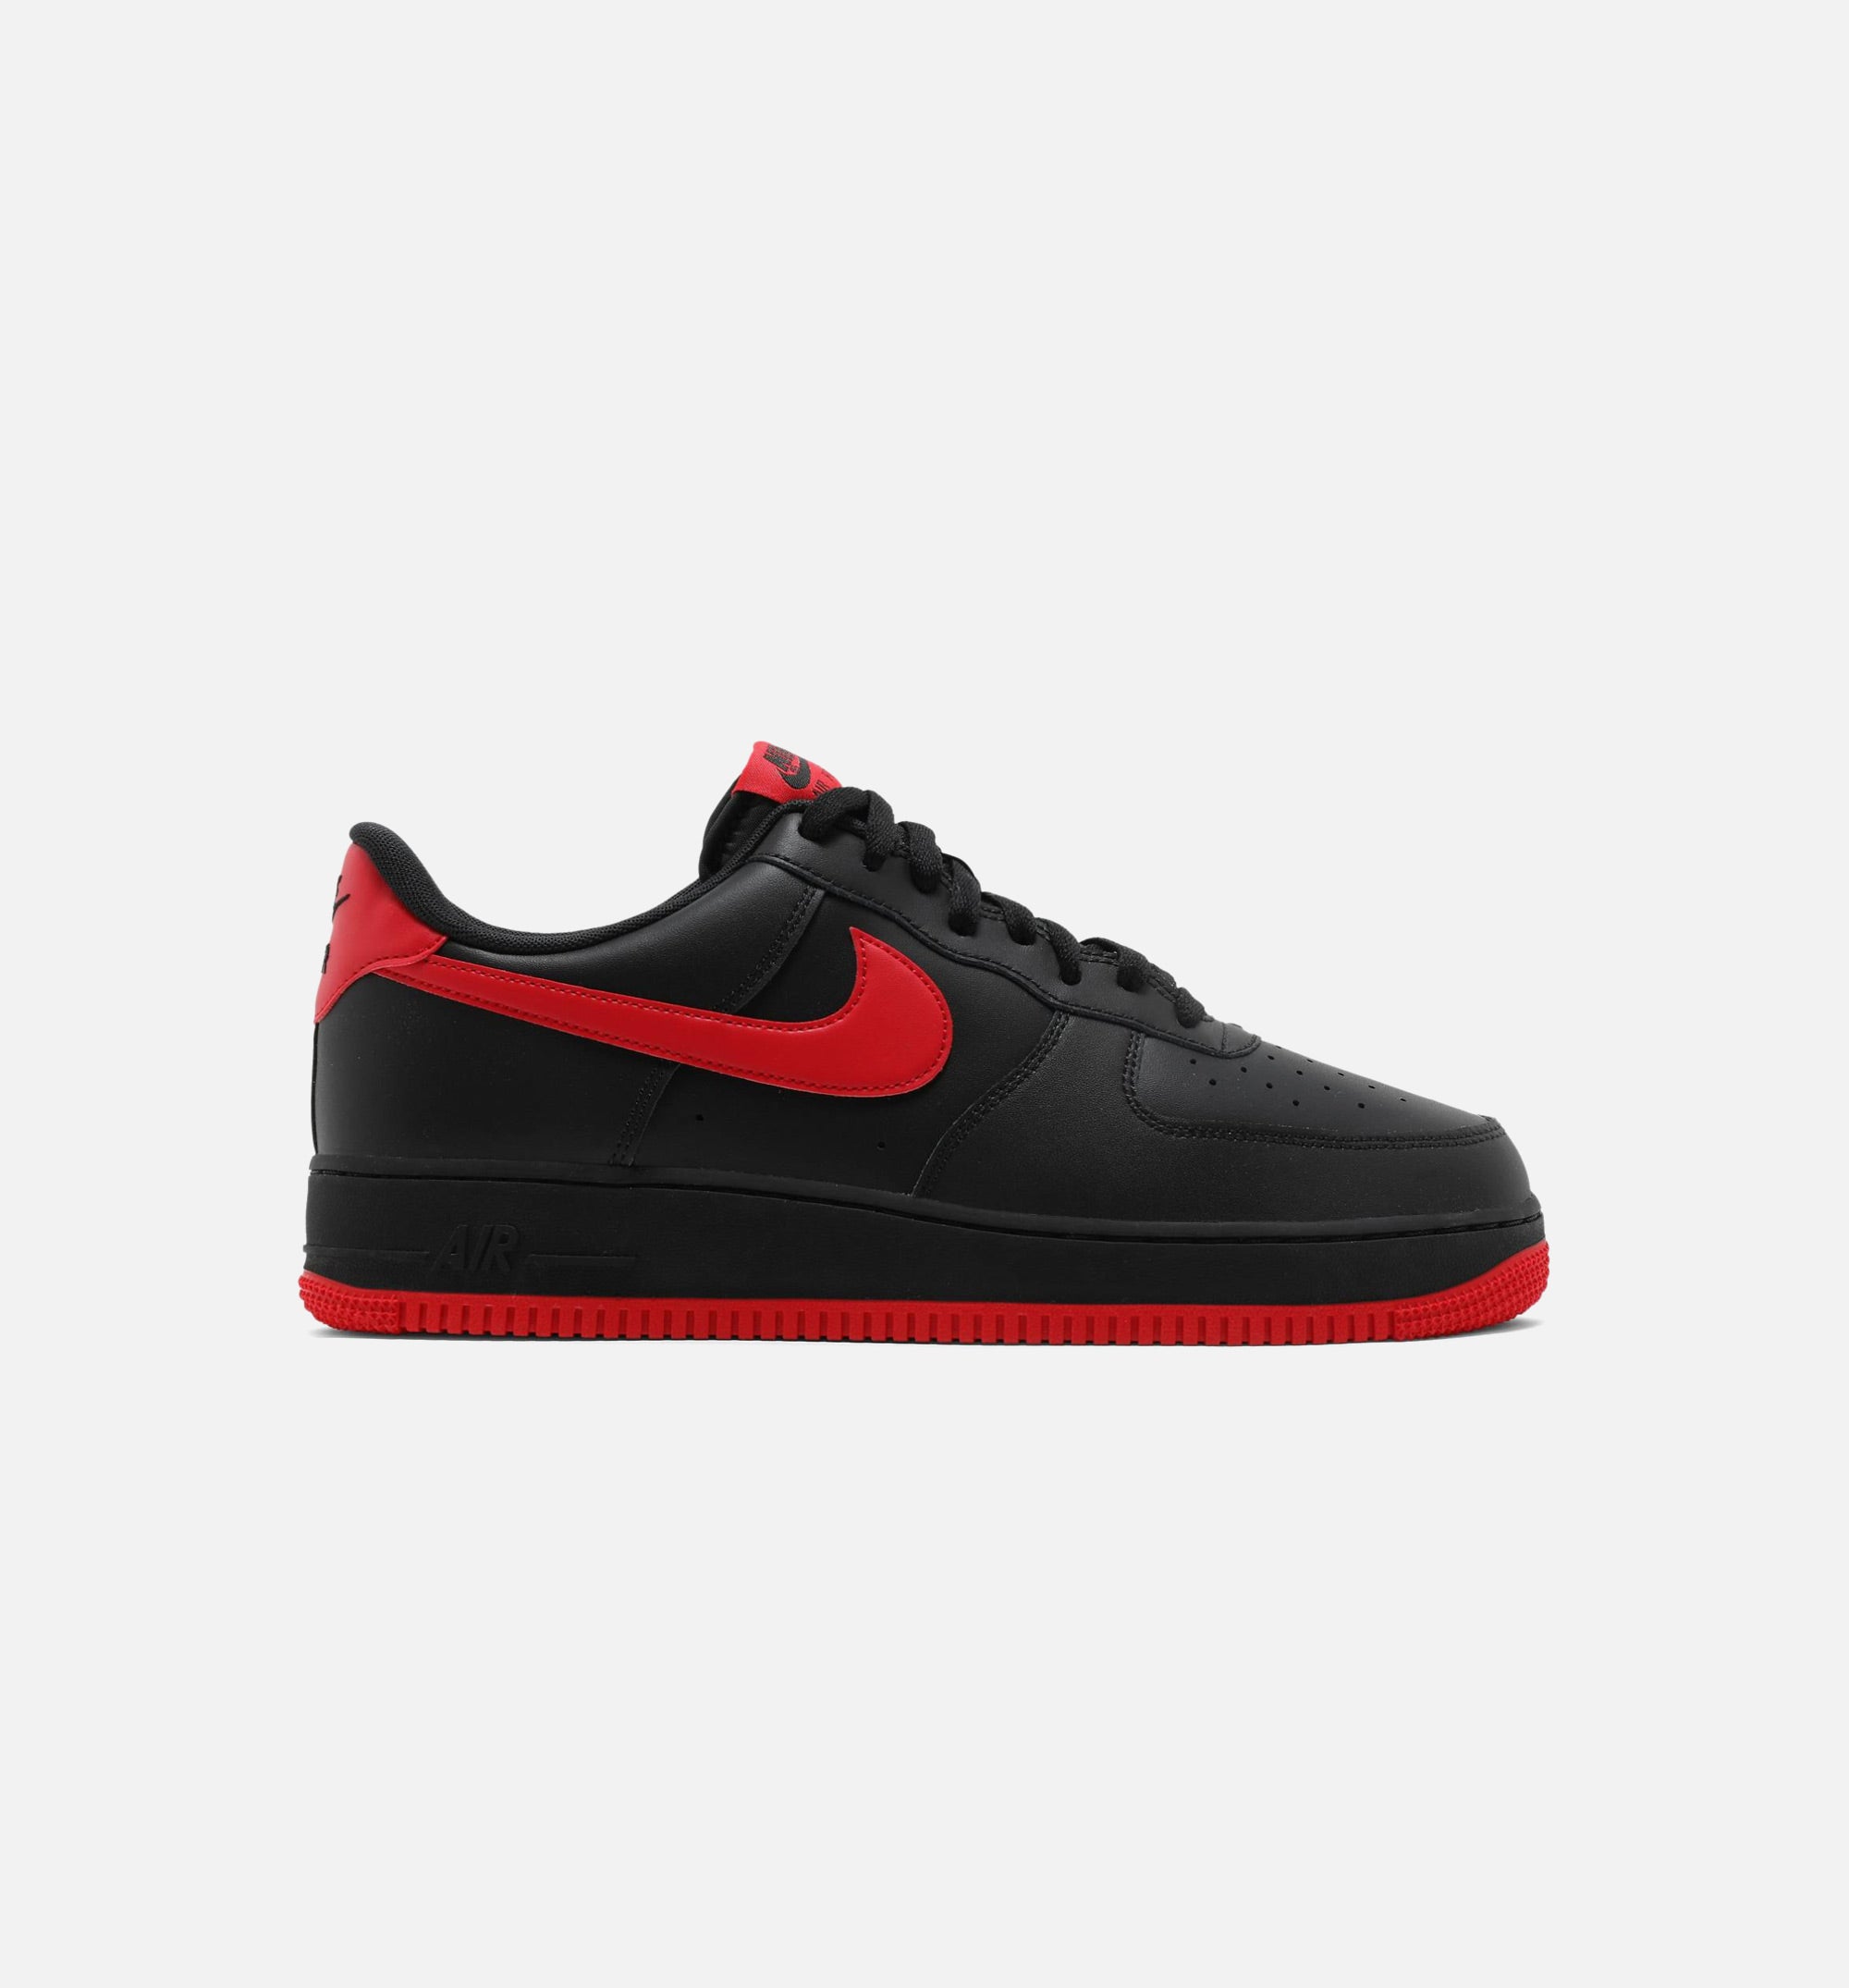 Nike Air Force 1 Low Utility Bred US Size 12 Men Black With Red